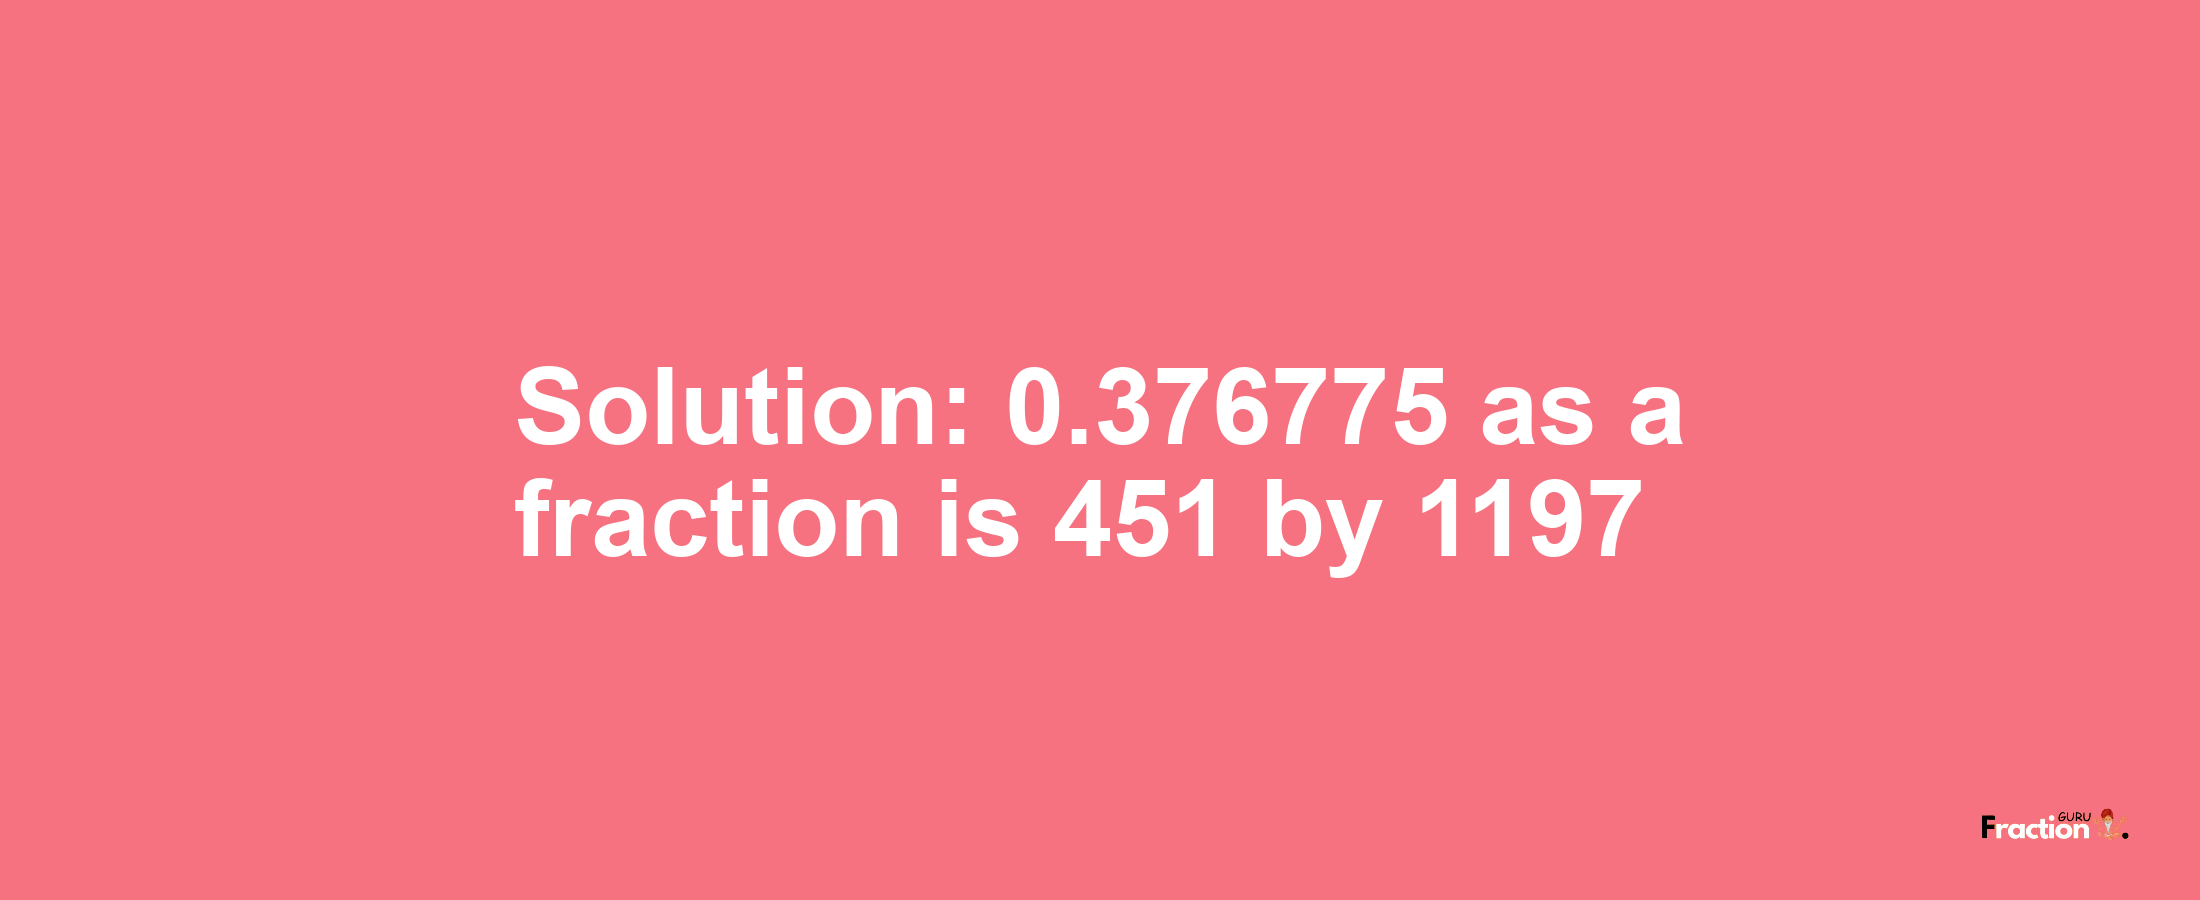 Solution:0.376775 as a fraction is 451/1197